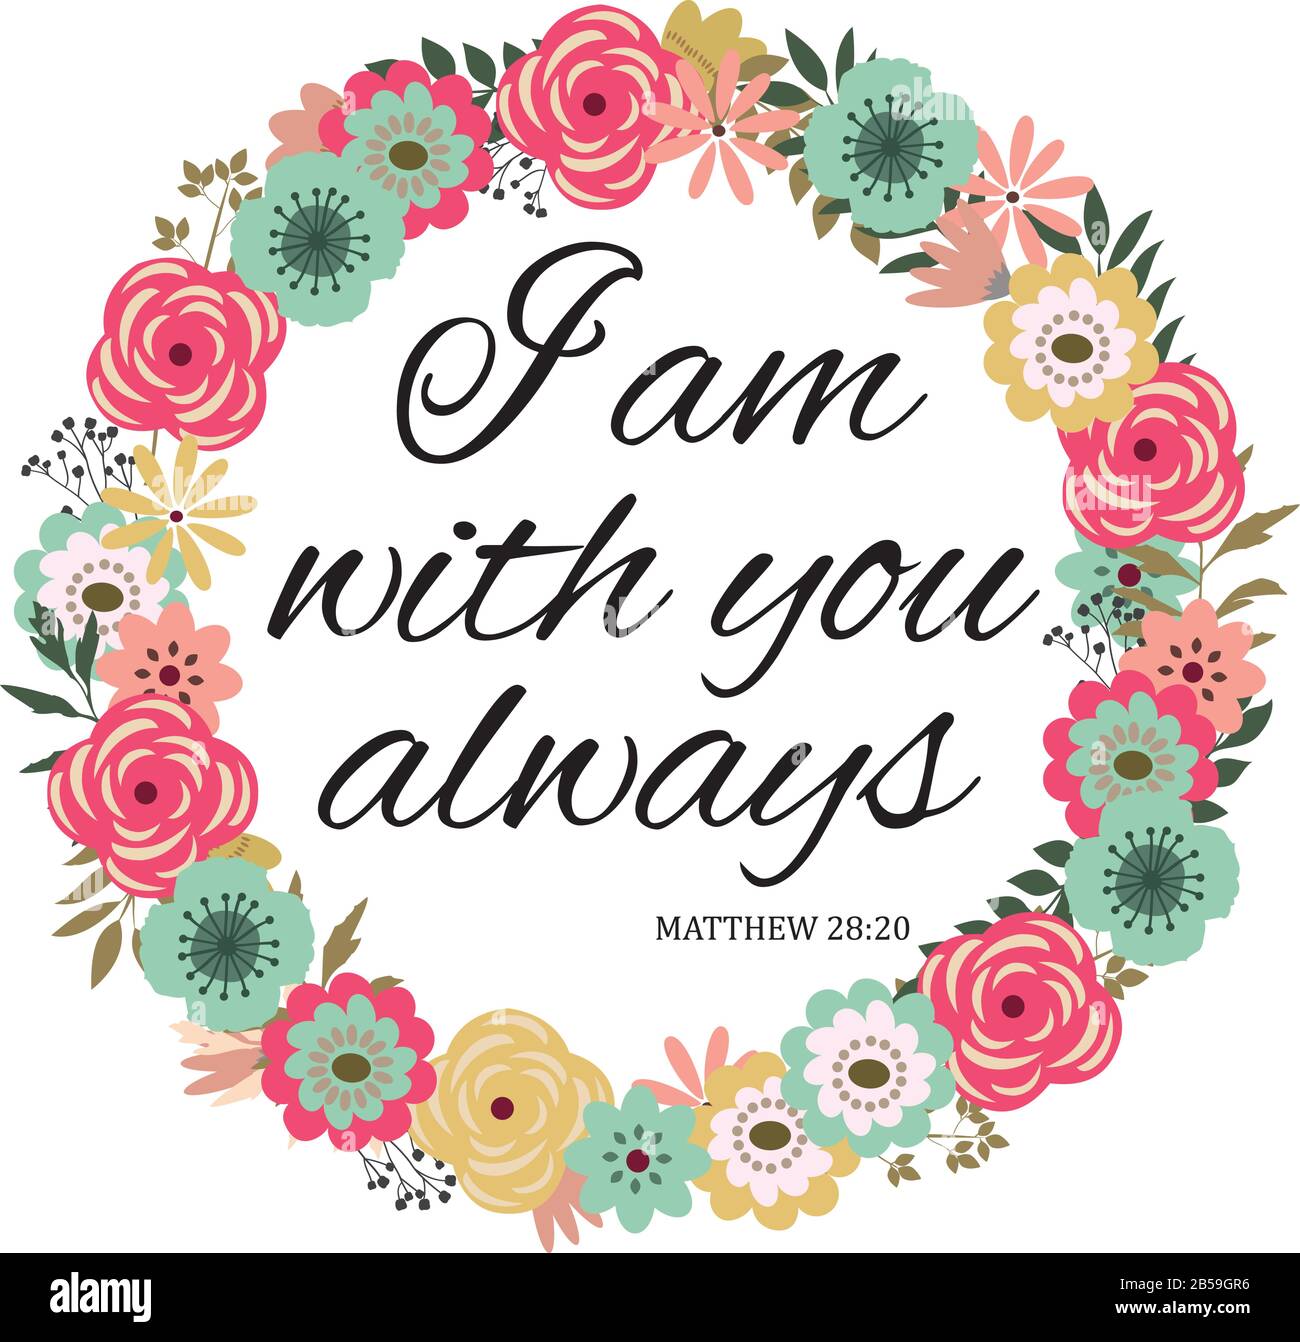 vector illustration of a bible verse. I am with you always. Bible verse. Inspirational qoute. Stock Vector